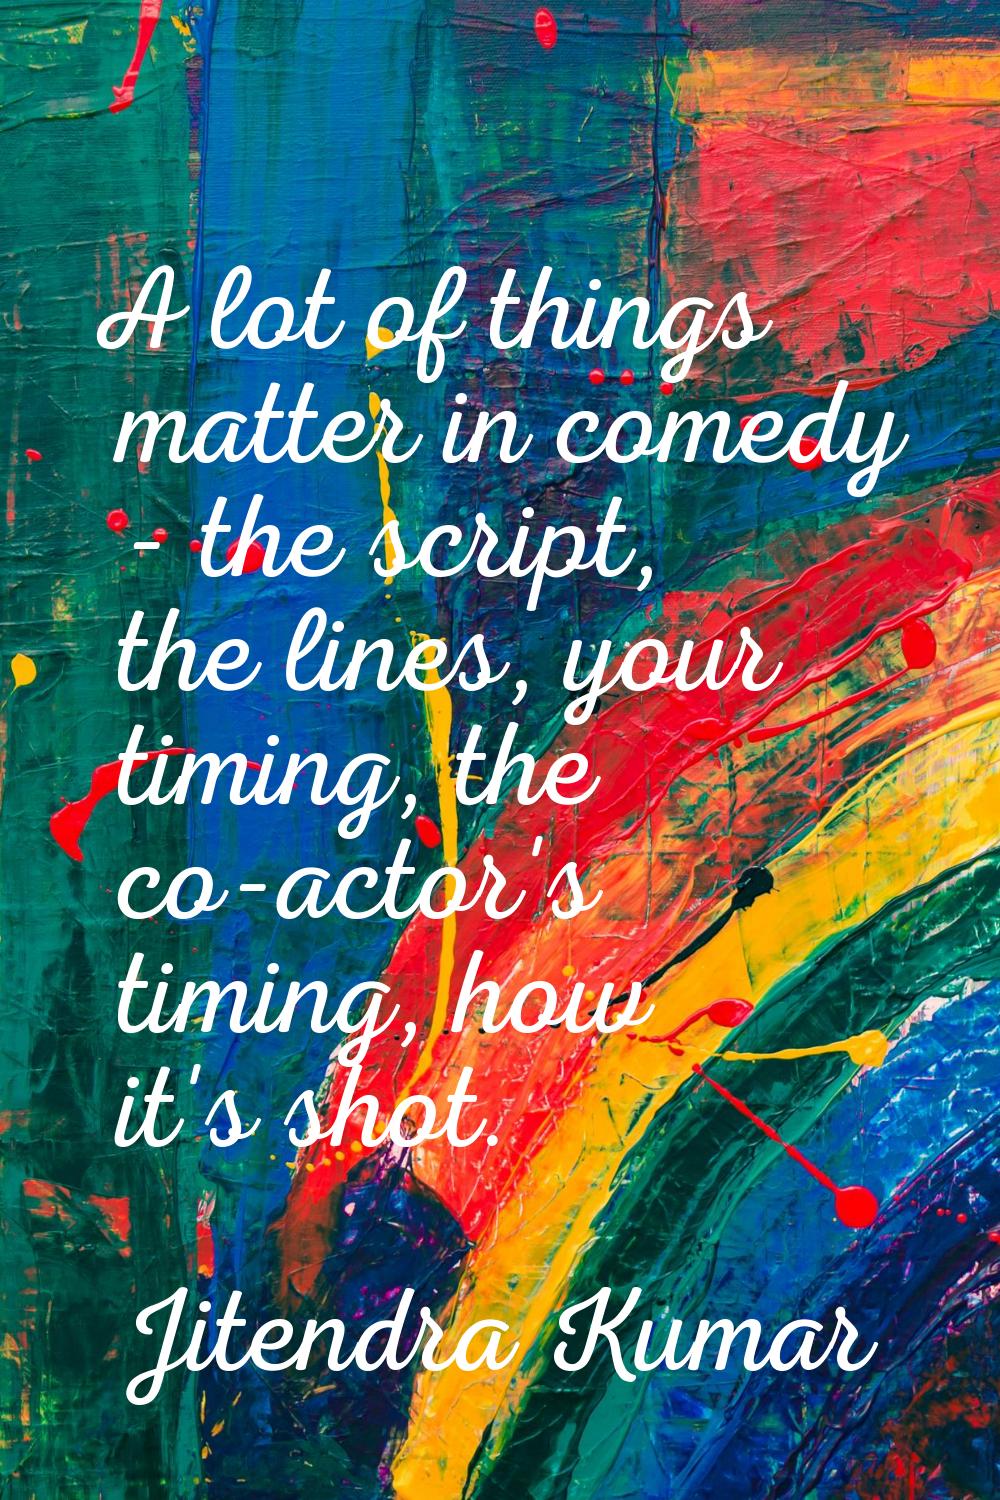 A lot of things matter in comedy - the script, the lines, your timing, the co-actor's timing, how i